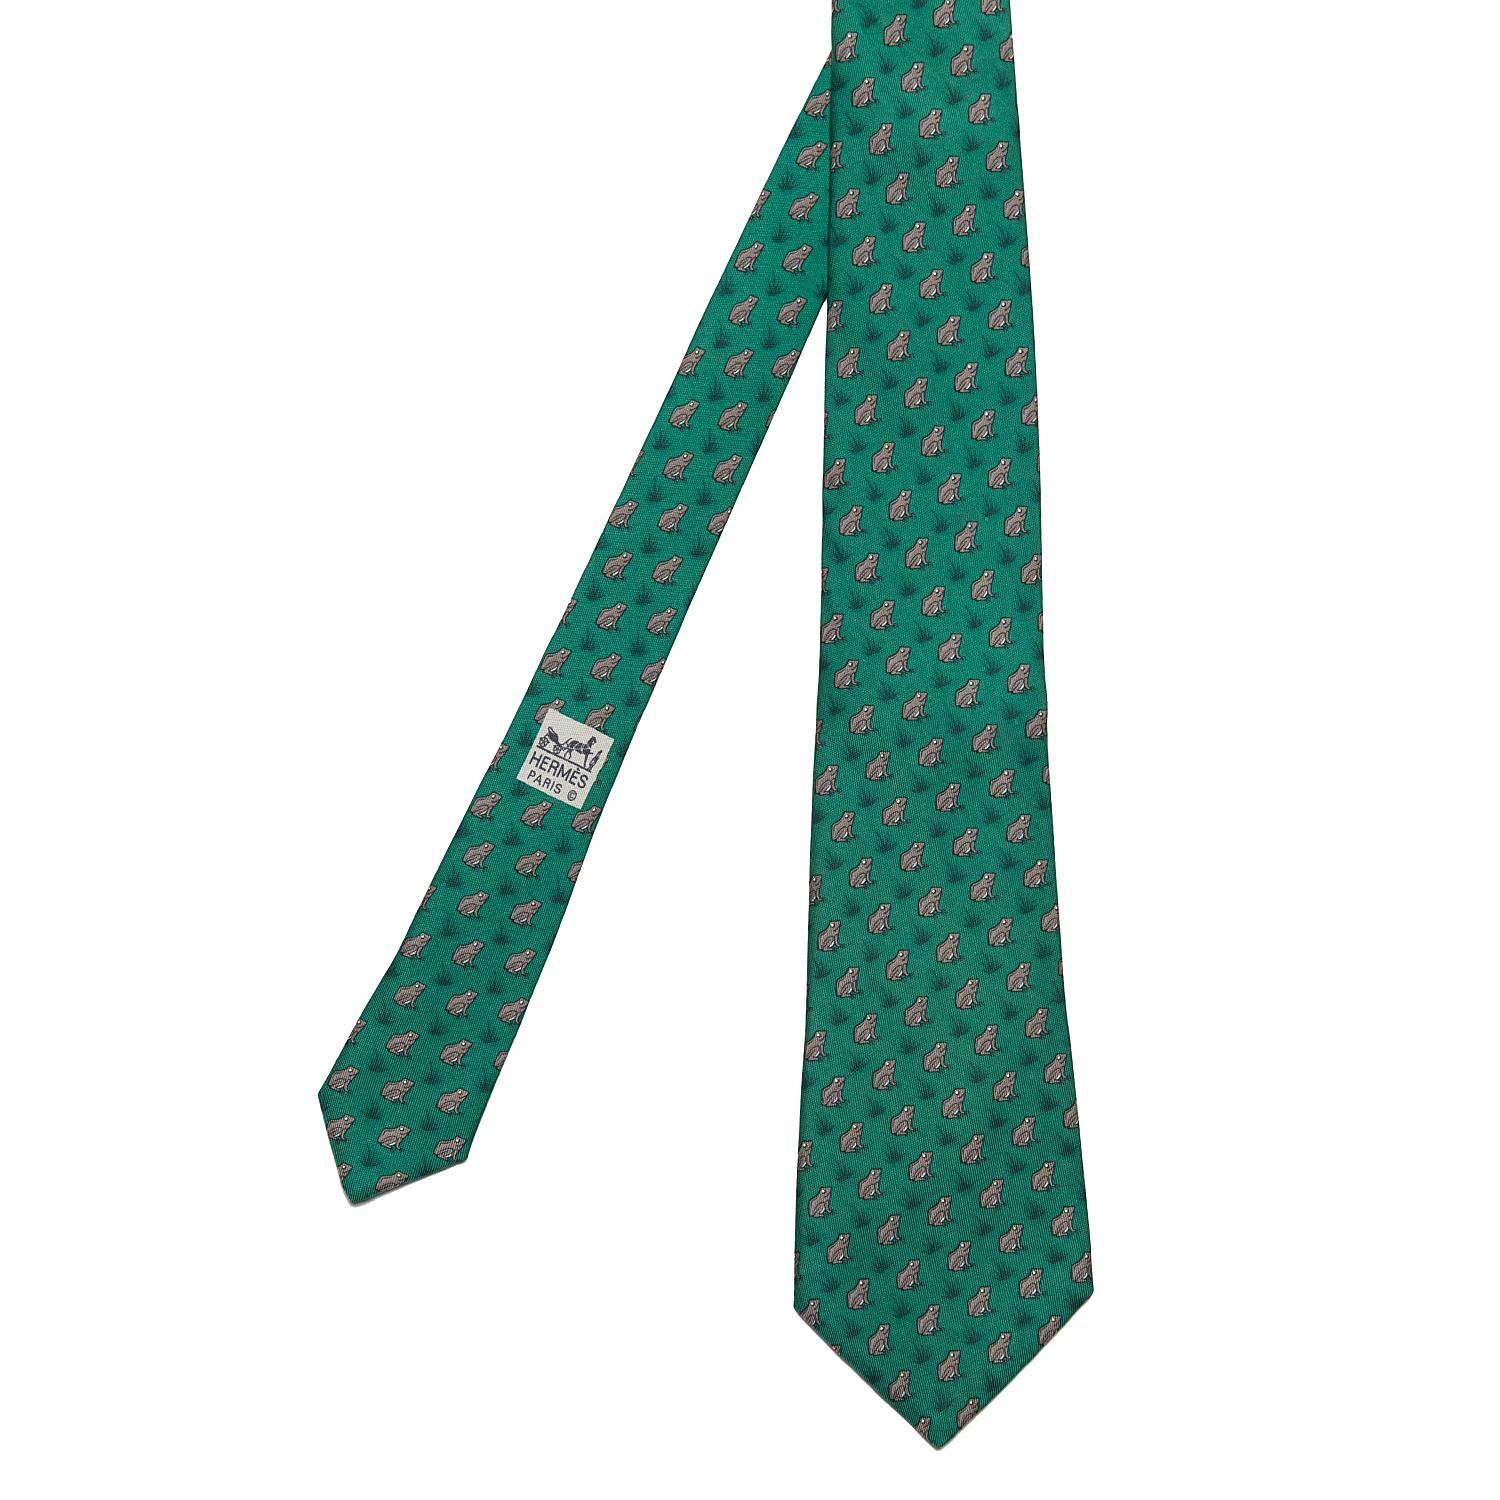 For all Toads & Toad lovers, this Vintage Hermes Silk Tie is in pristine 'As New' condition. Motif on an Emerald green ground.